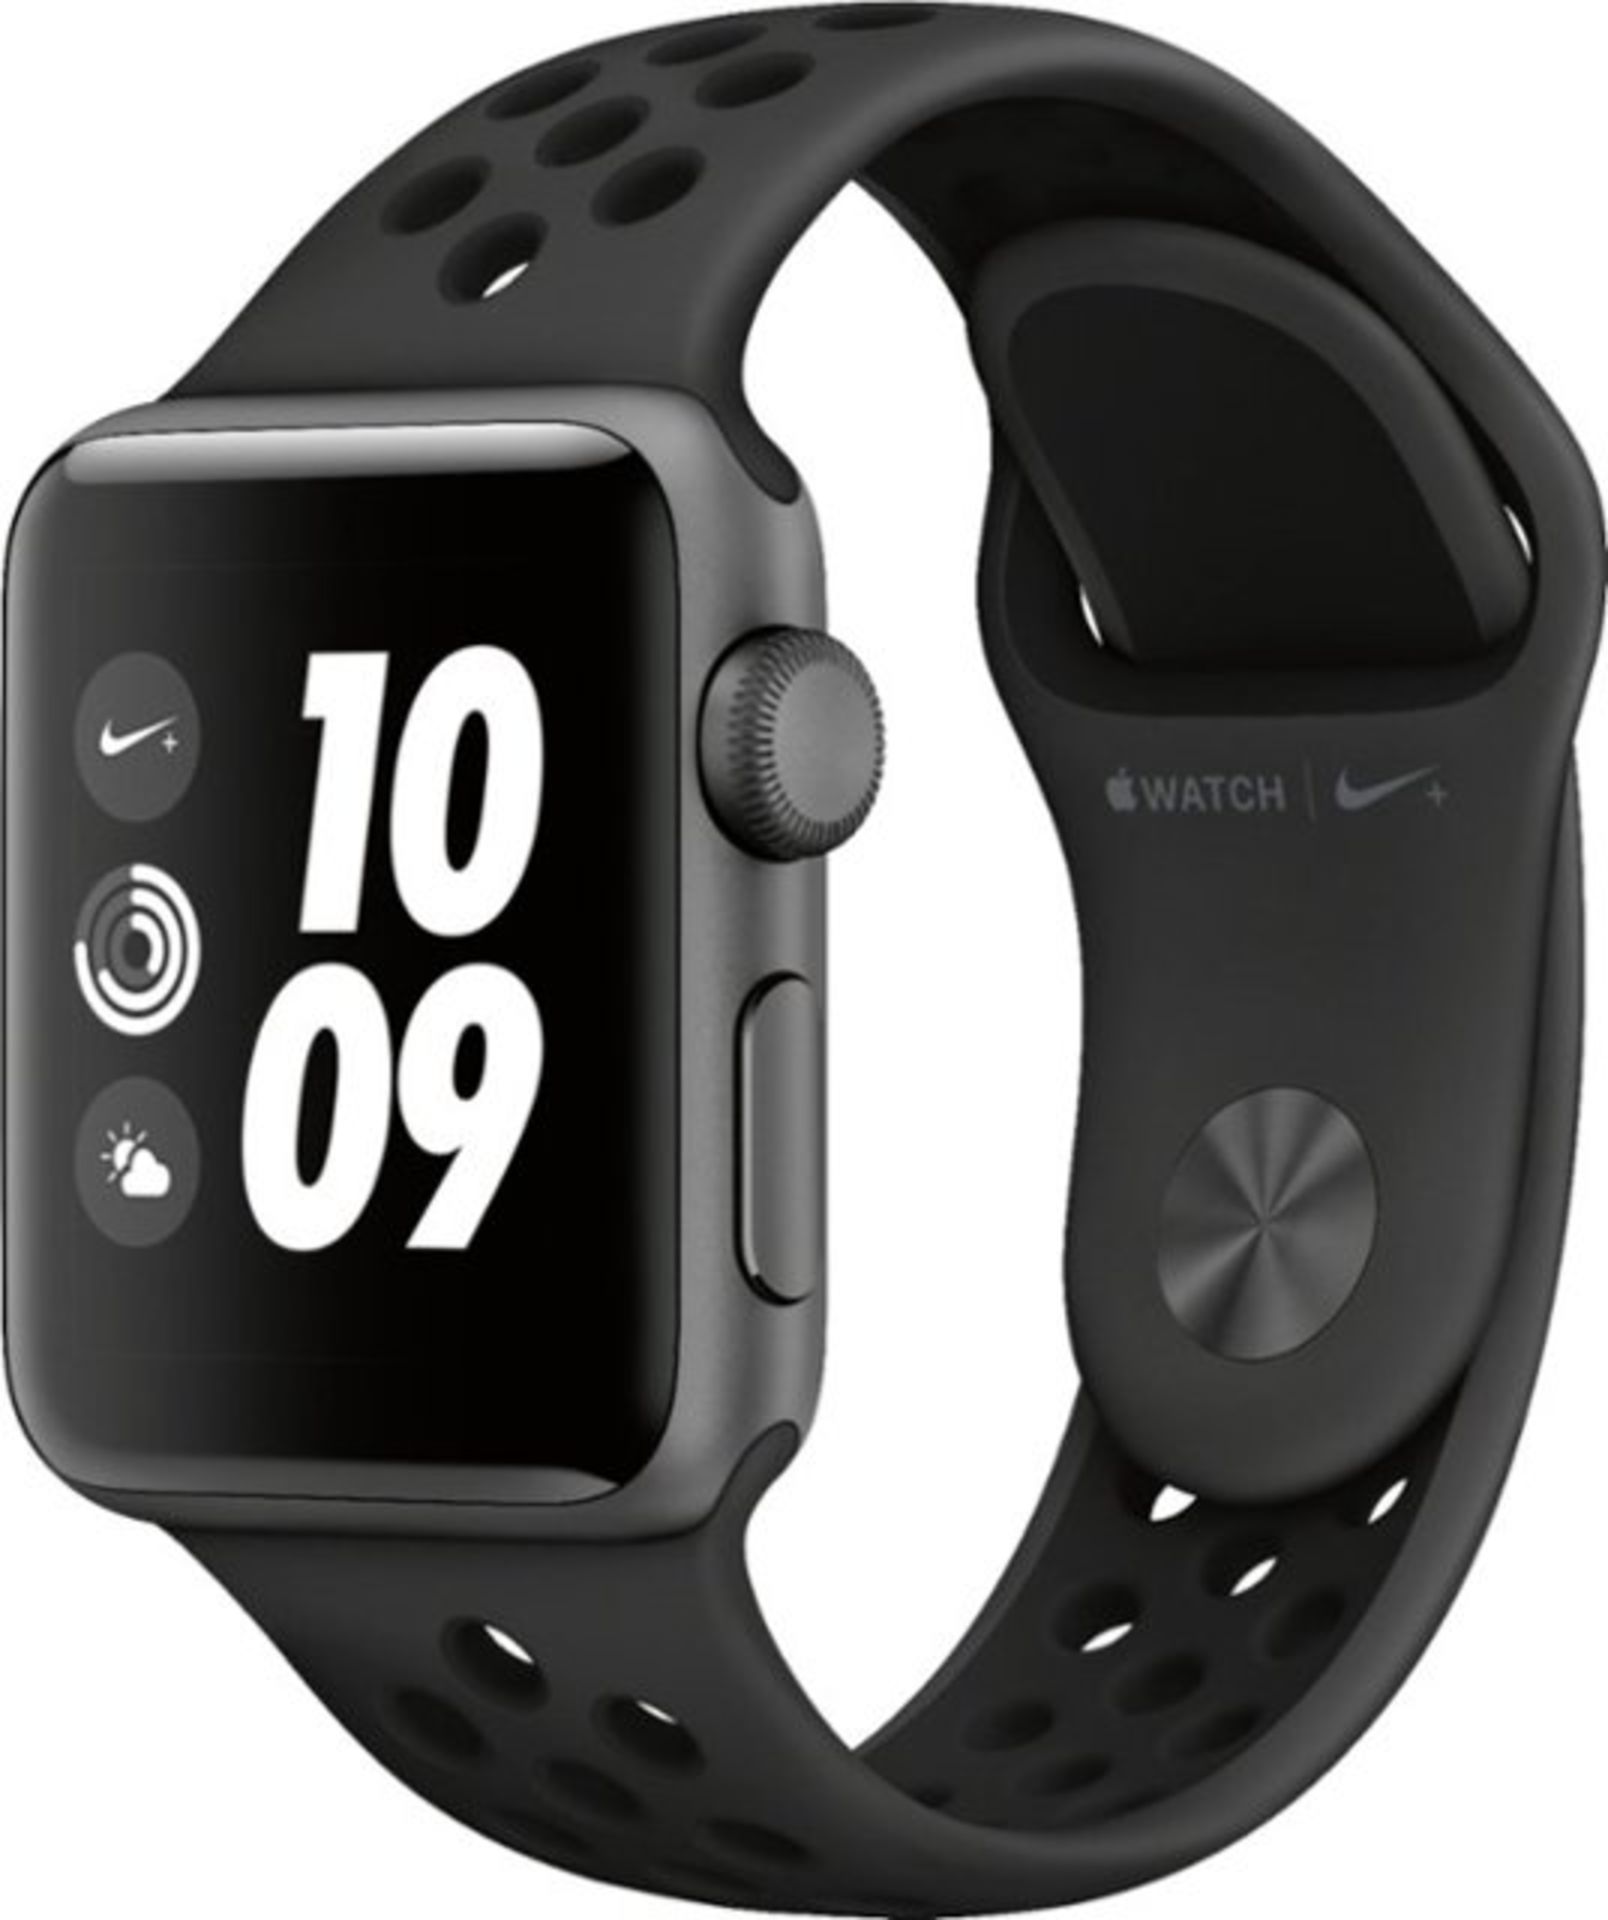 V Grade A Apple Watch Series 3 Space Grey 38mm Nike Edition + Cellular (Includes Genuine Apple Strap